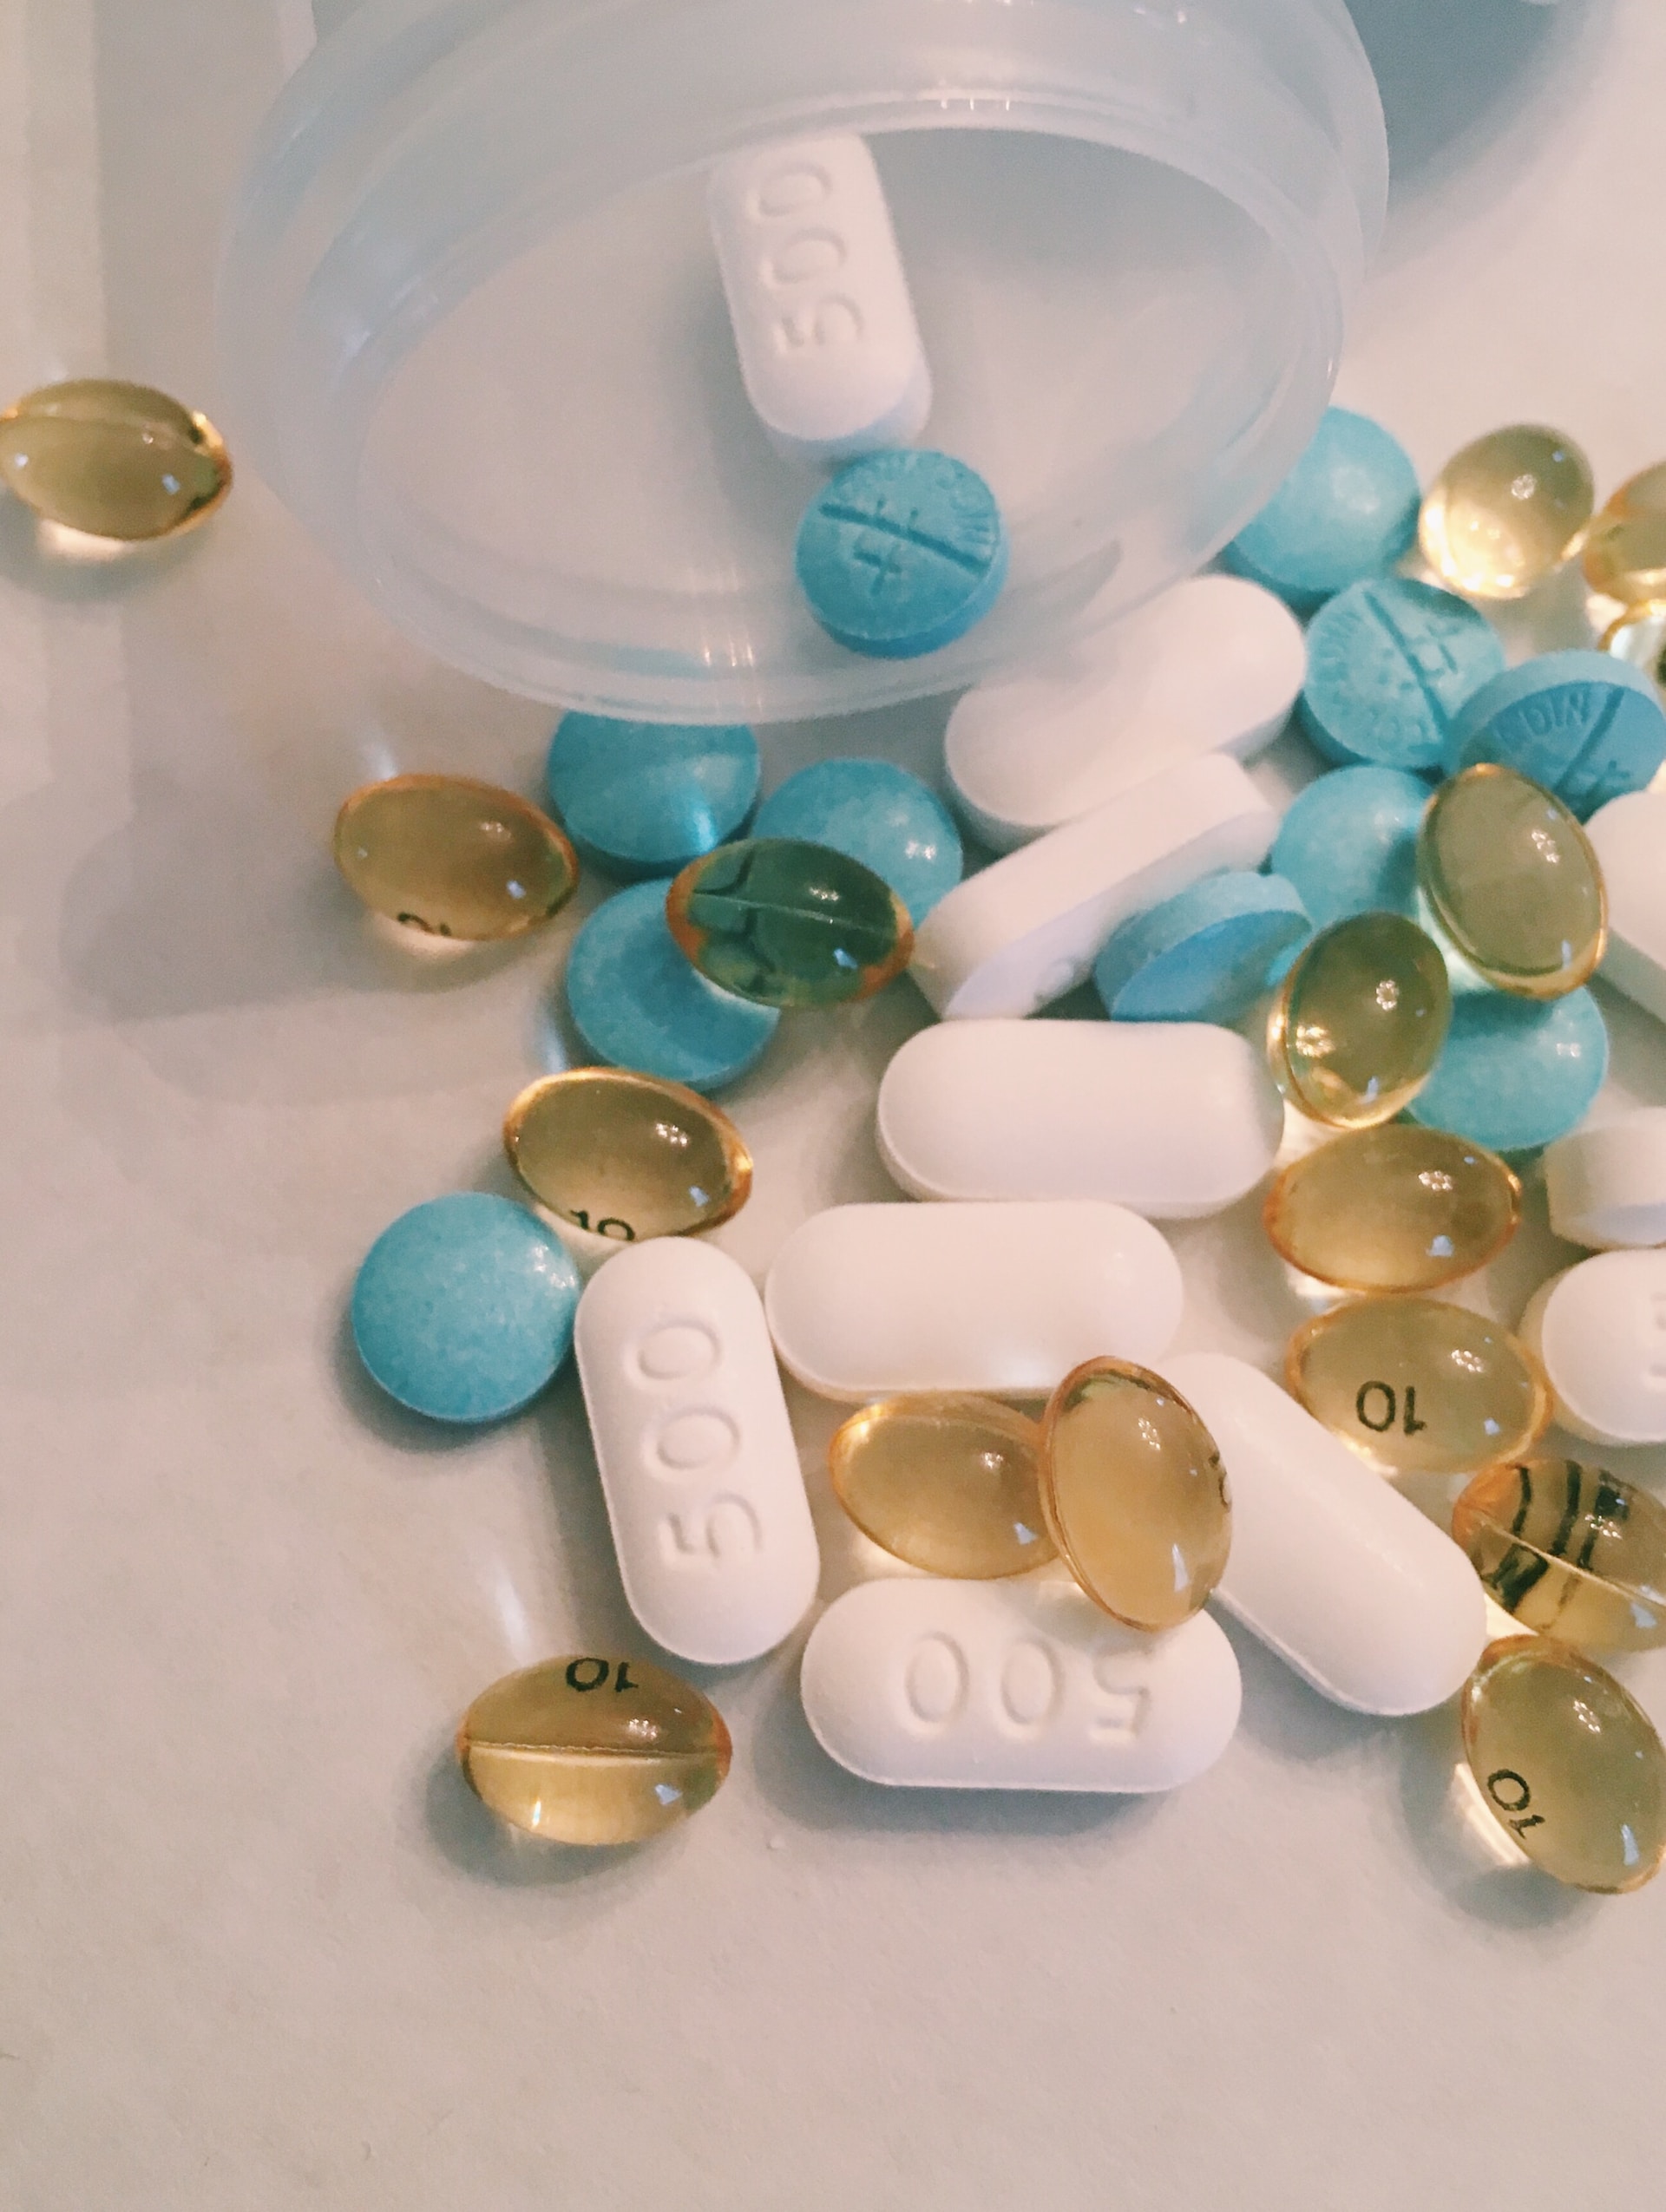 Photograph of three types of pills (blue round, white capsules, and transparent beads) spilling from an open pill bottle